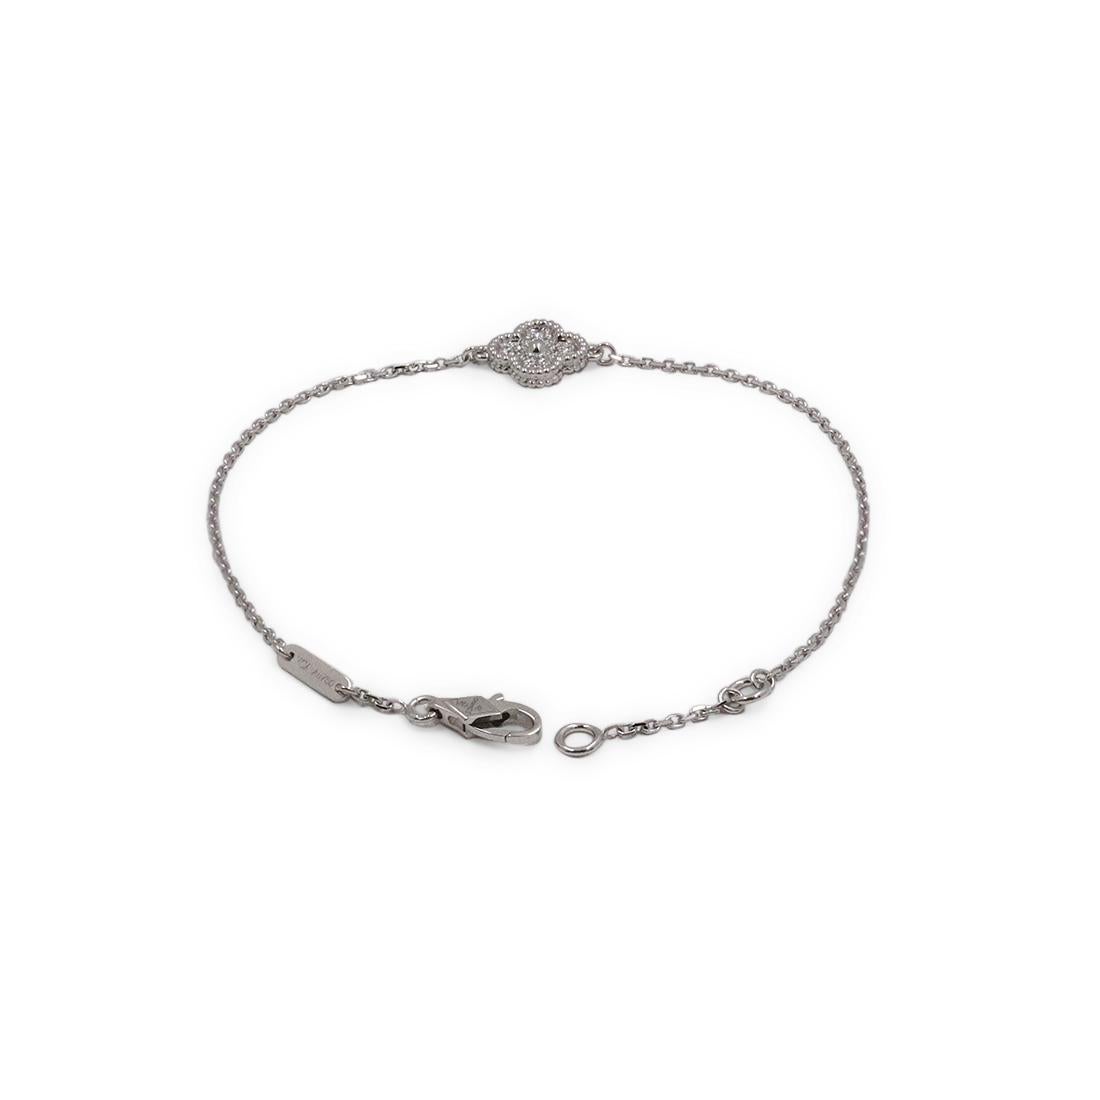 Authentic Van Cleef & Arpels Sweet Alhambra bracelet crafted in 18 karat white gold and set with approximately 0.08 carats of round brilliant cut diamonds. The bracelet will fit up to a 6 3/4 inch wrist. Signed VCA, Au750, with serial number and